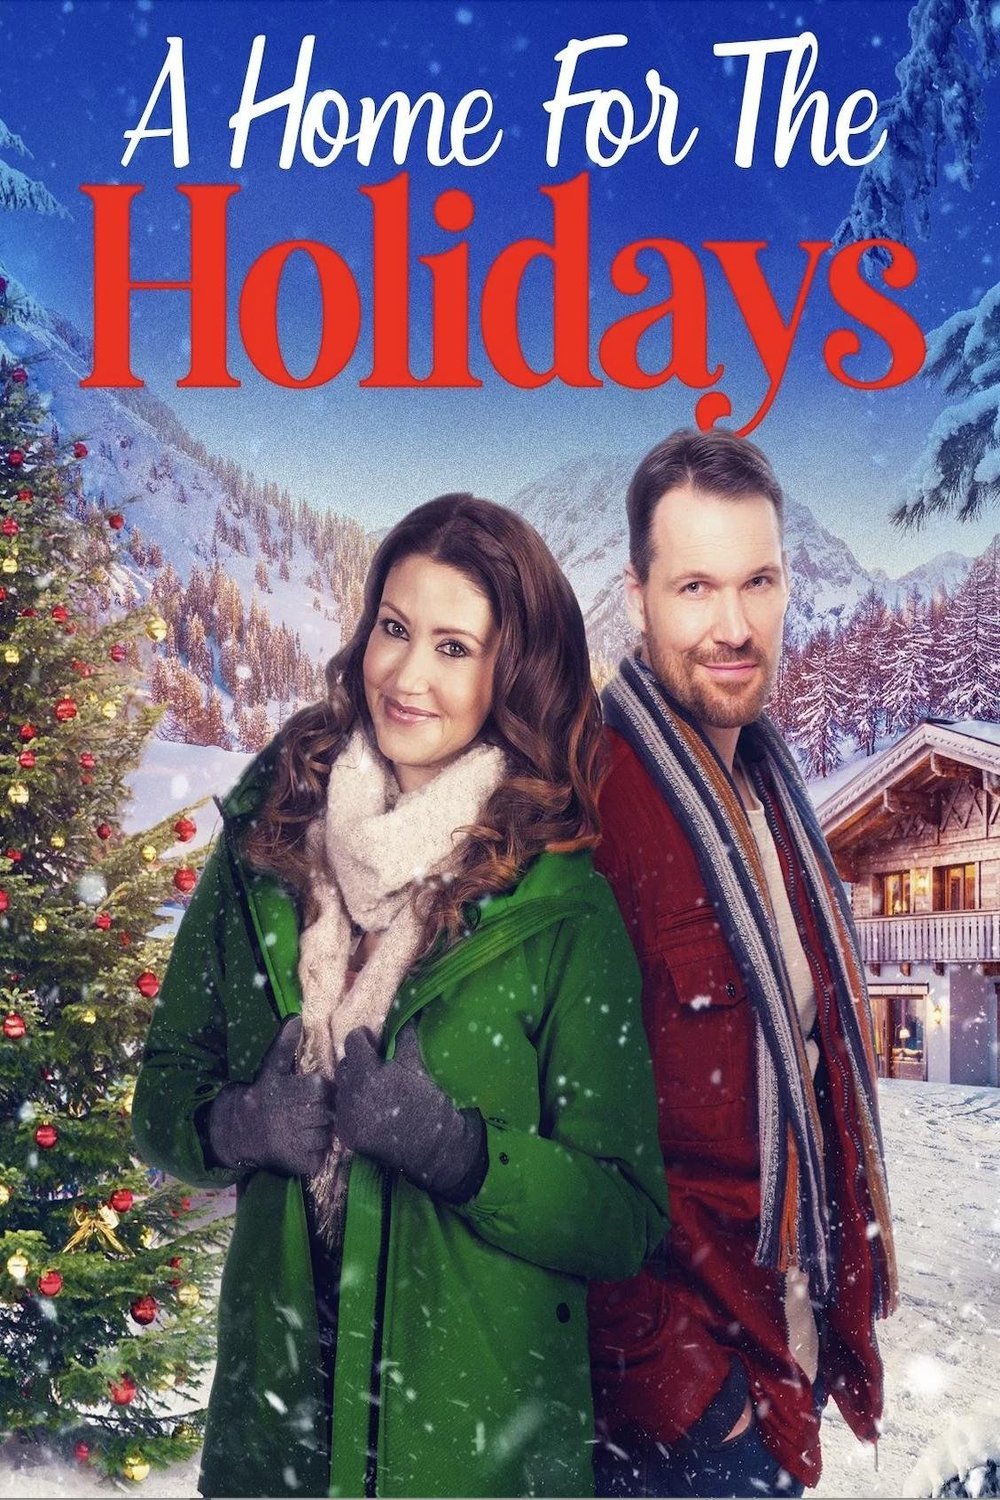 Poster of the movie A Home for the Holidays